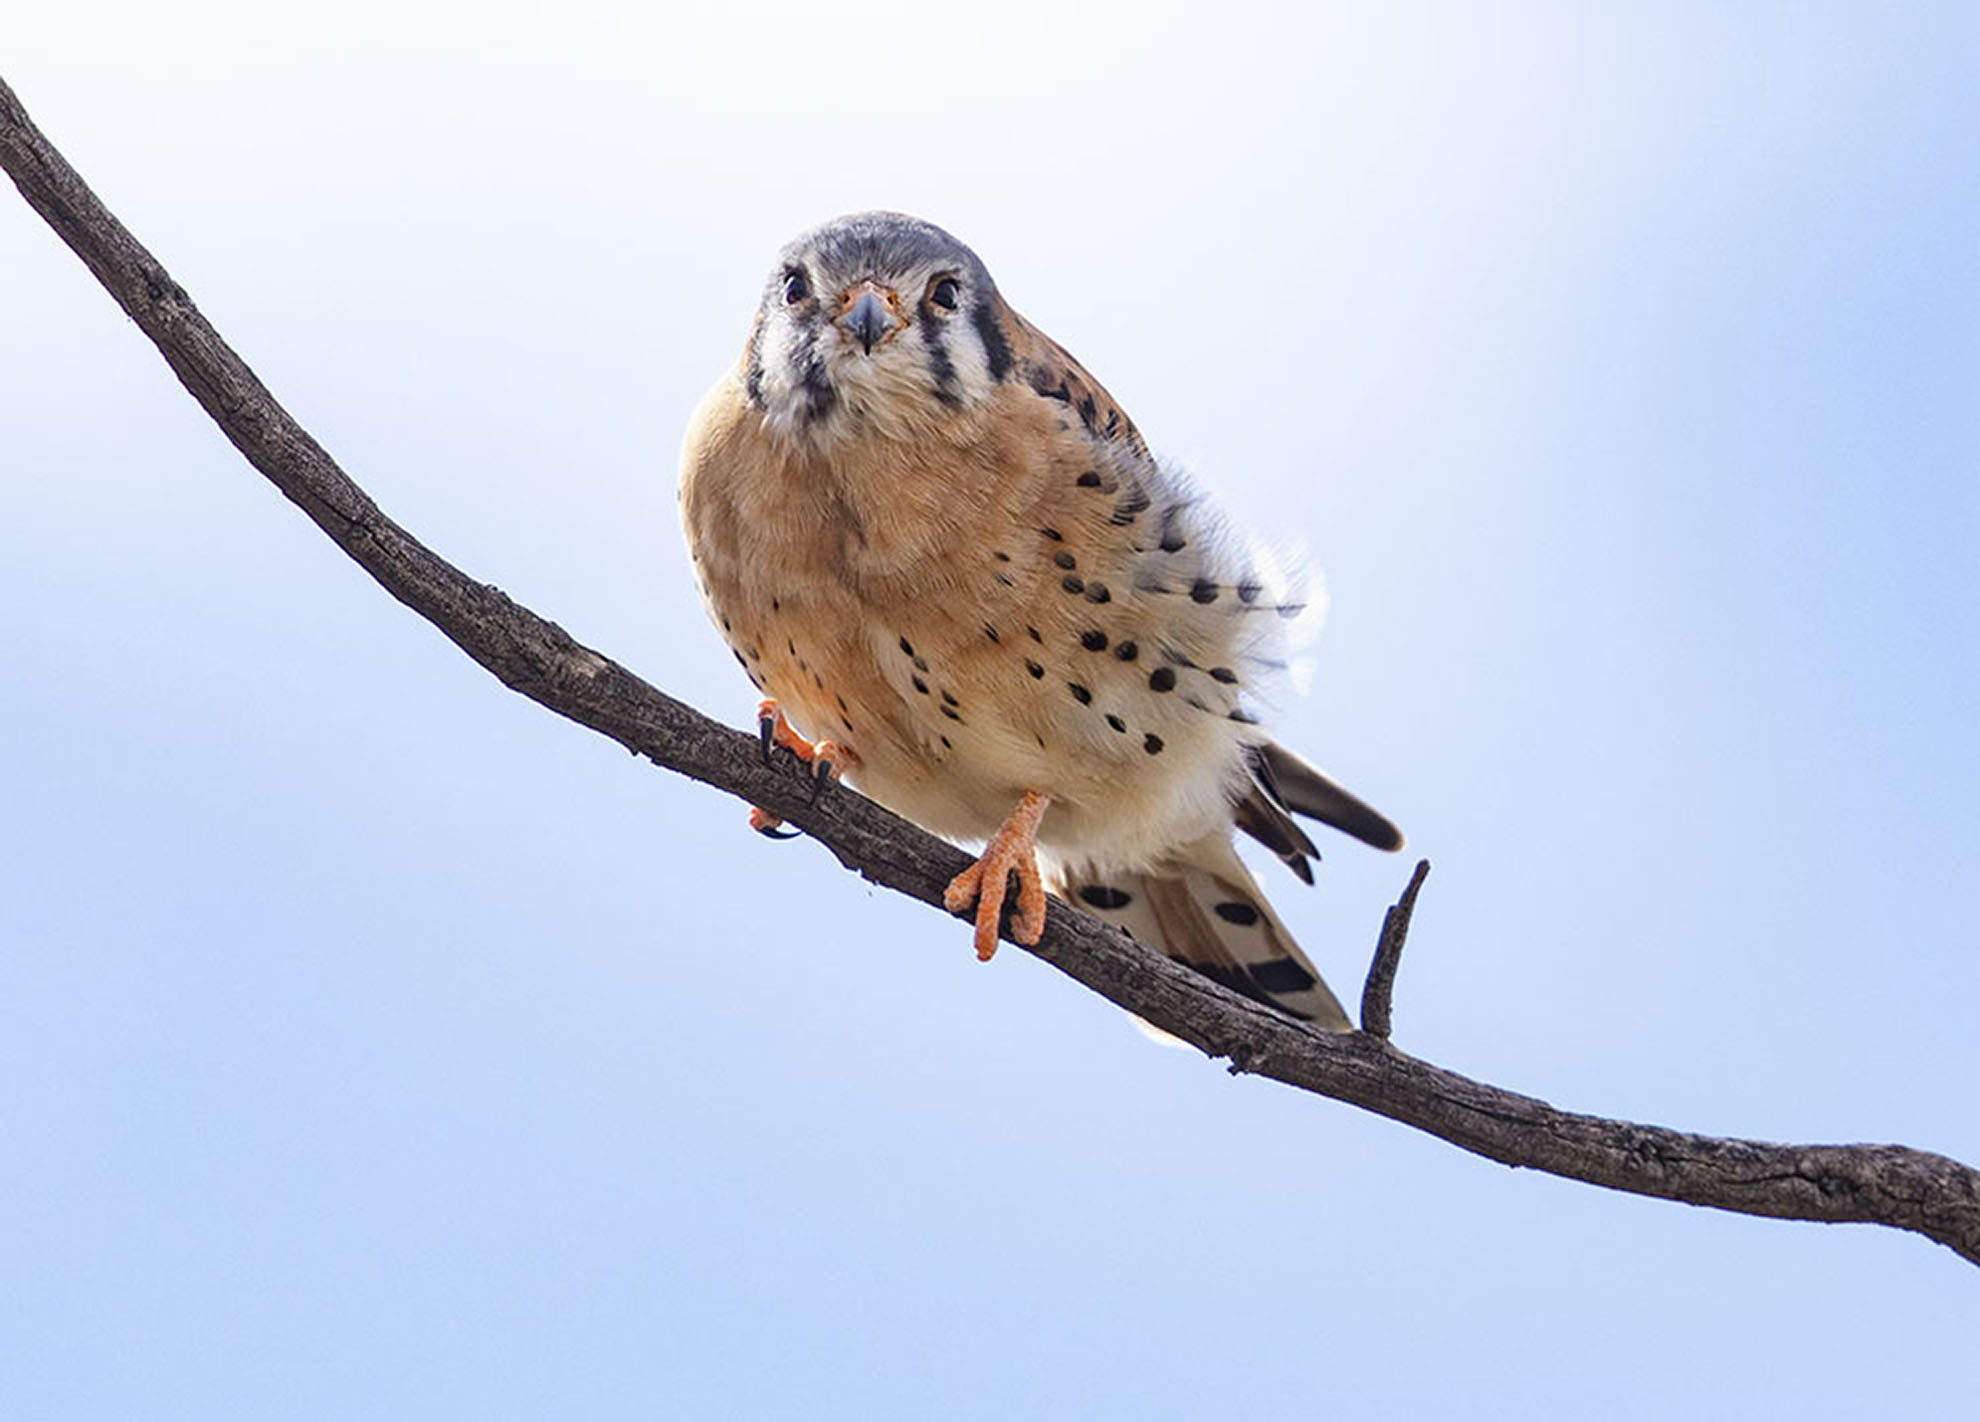 Portrait of a kestrel perched on a branch